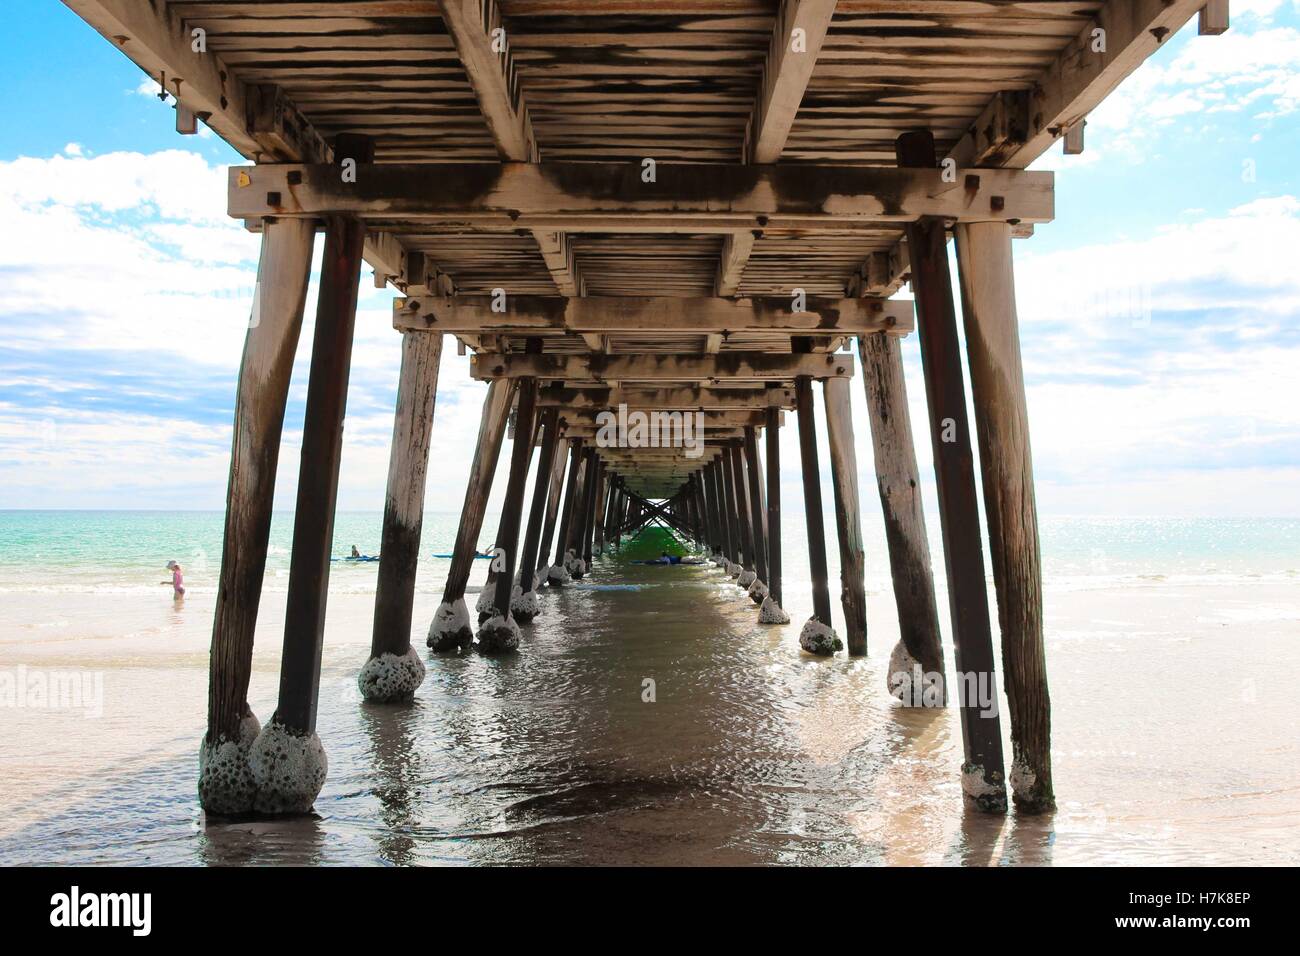 One-point perspective shot taken underneath a wooden jetty / pier on a beach in South Australia. Stock Photo